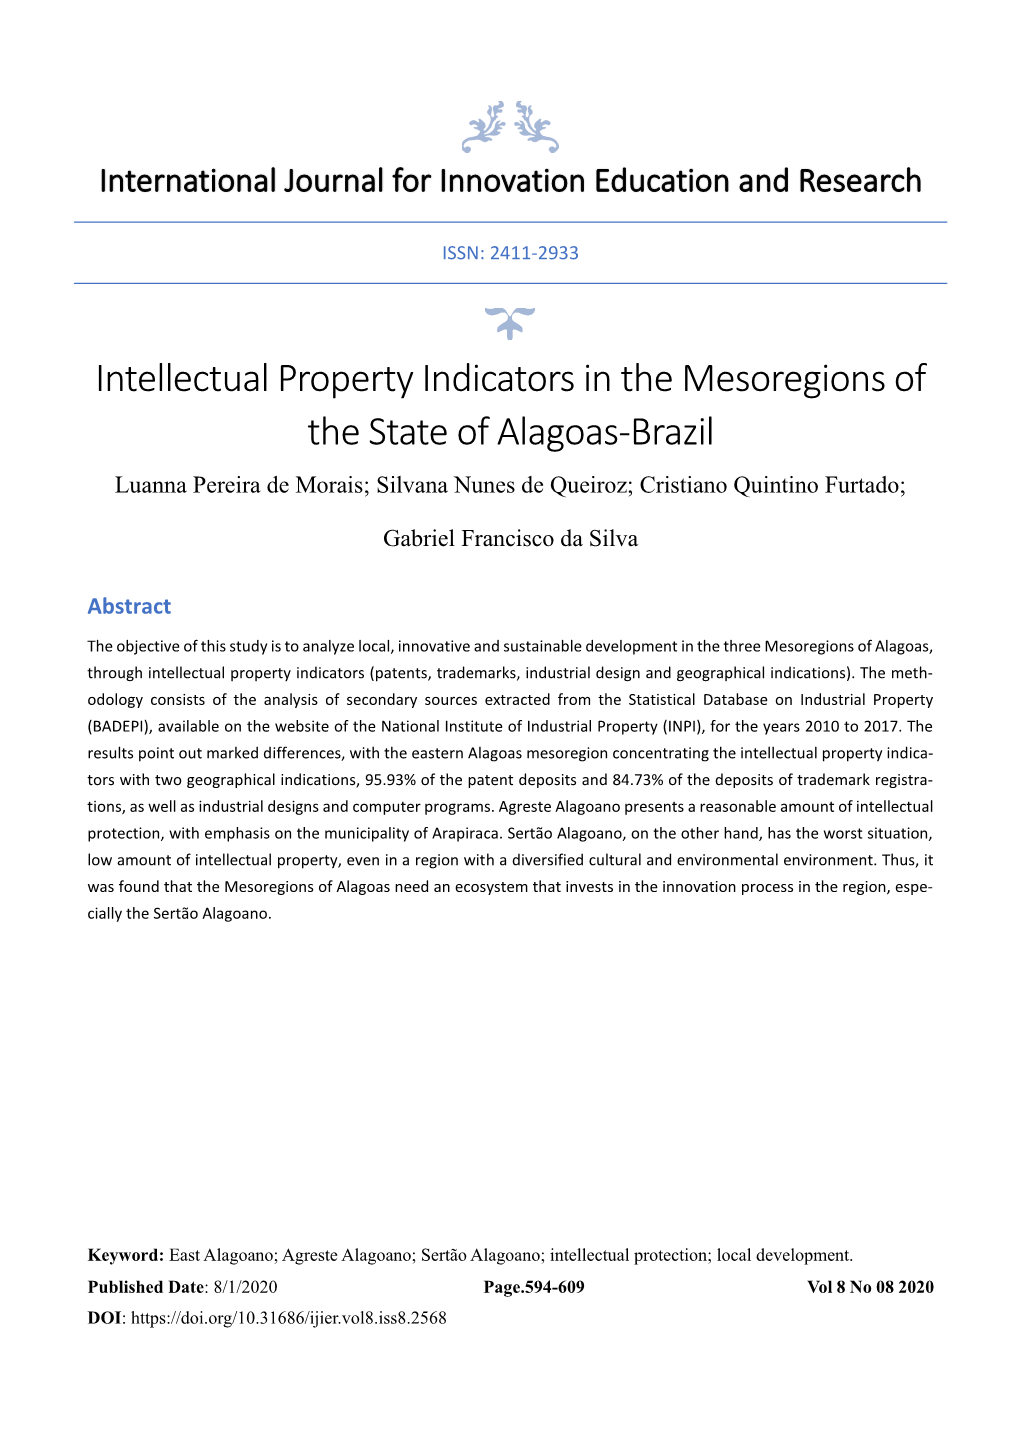 Intellectual Property Indicators in the Mesoregions of the State of Alagoas-Brazil